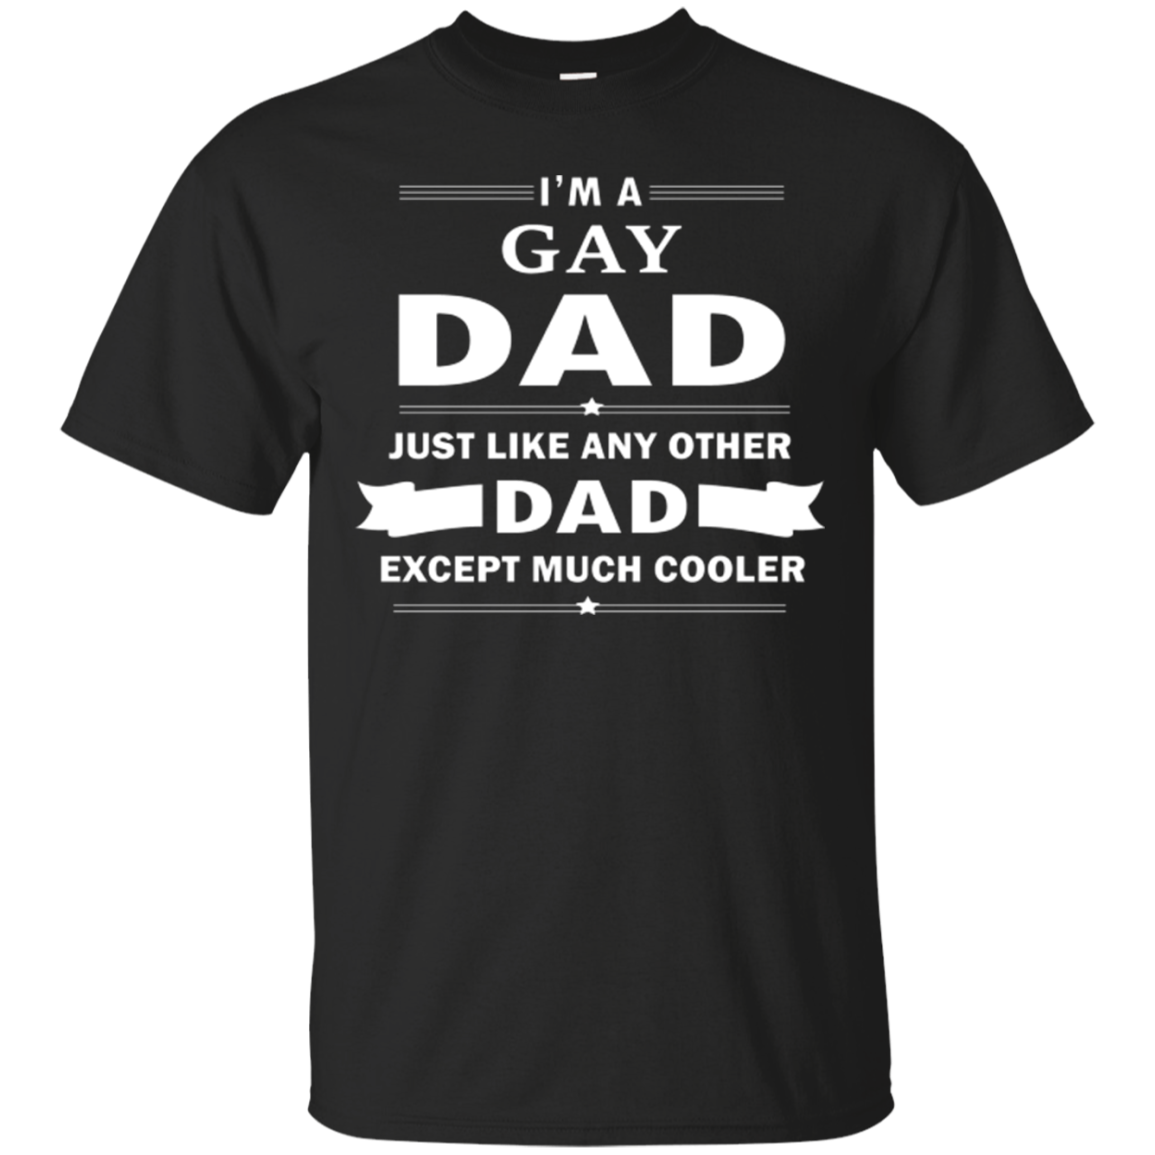 I'm a Gay Dad, just like any other Dad, black tshirt for Gay